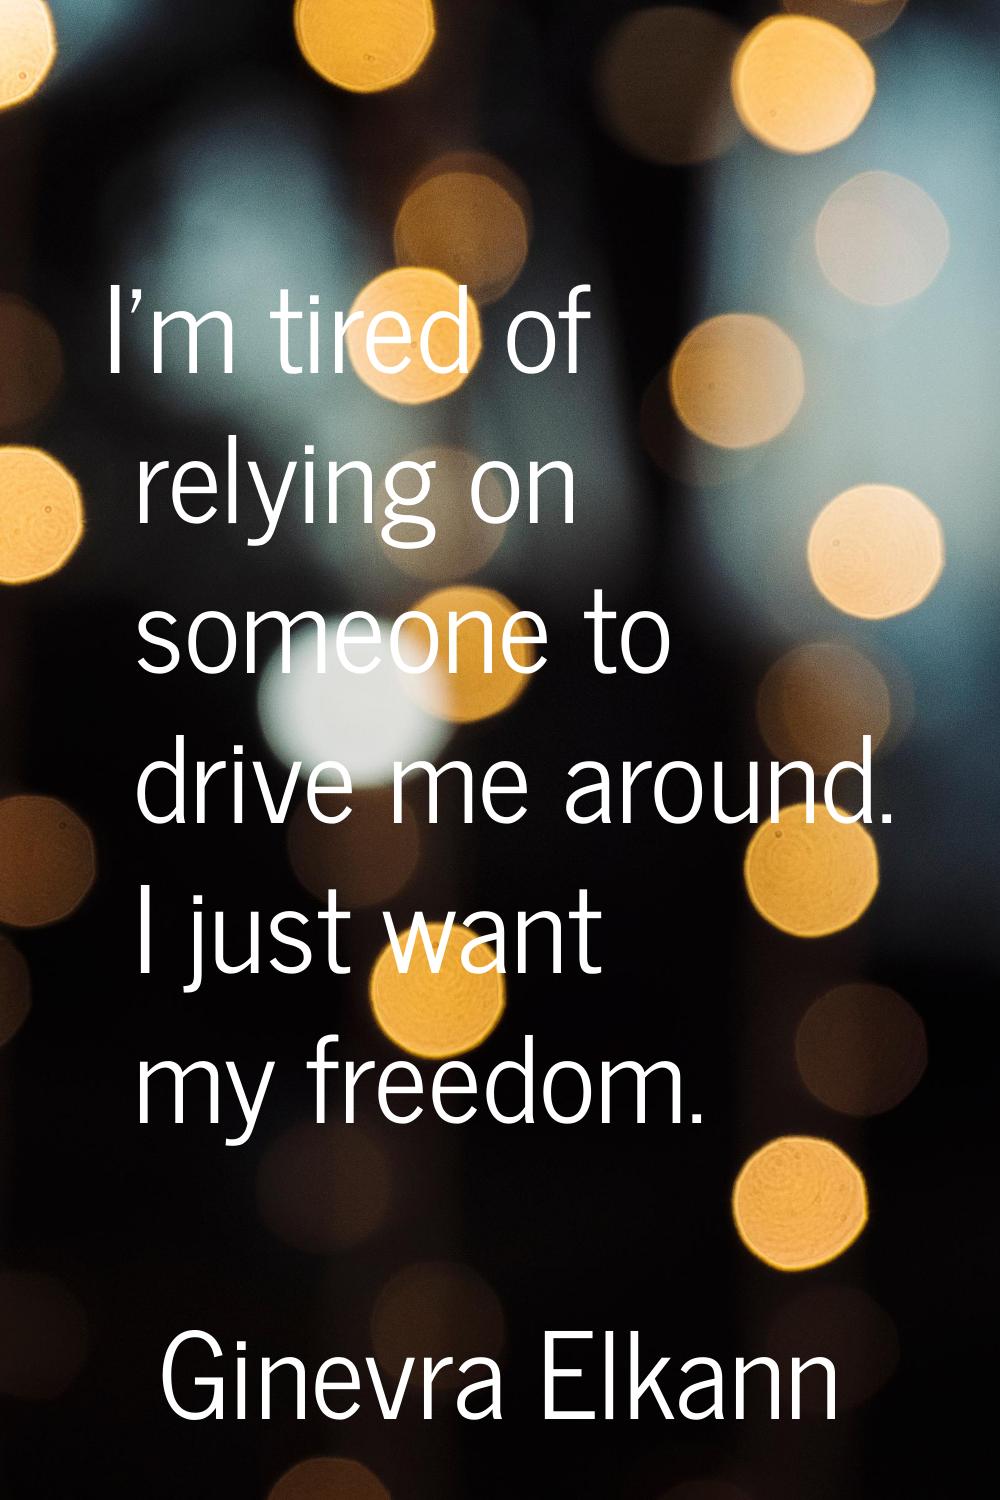 I'm tired of relying on someone to drive me around. I just want my freedom.